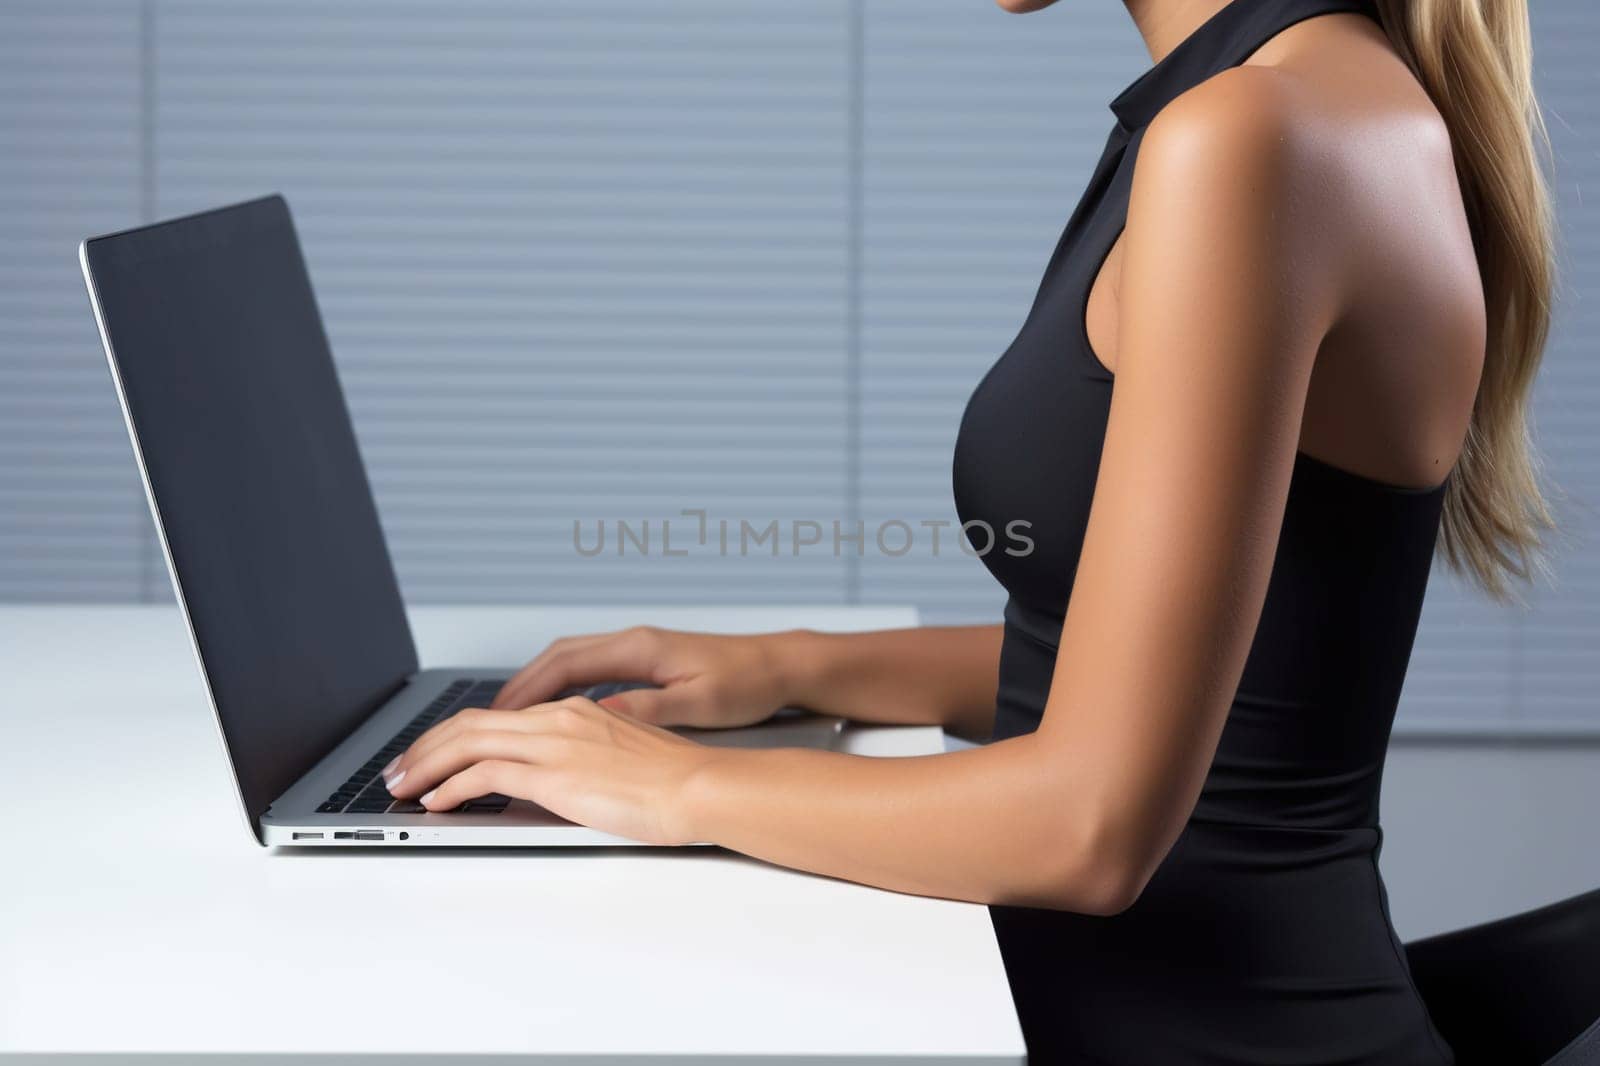 Business woman in black typing on a laptop in the workplace Woman working in the office on a keyboard.